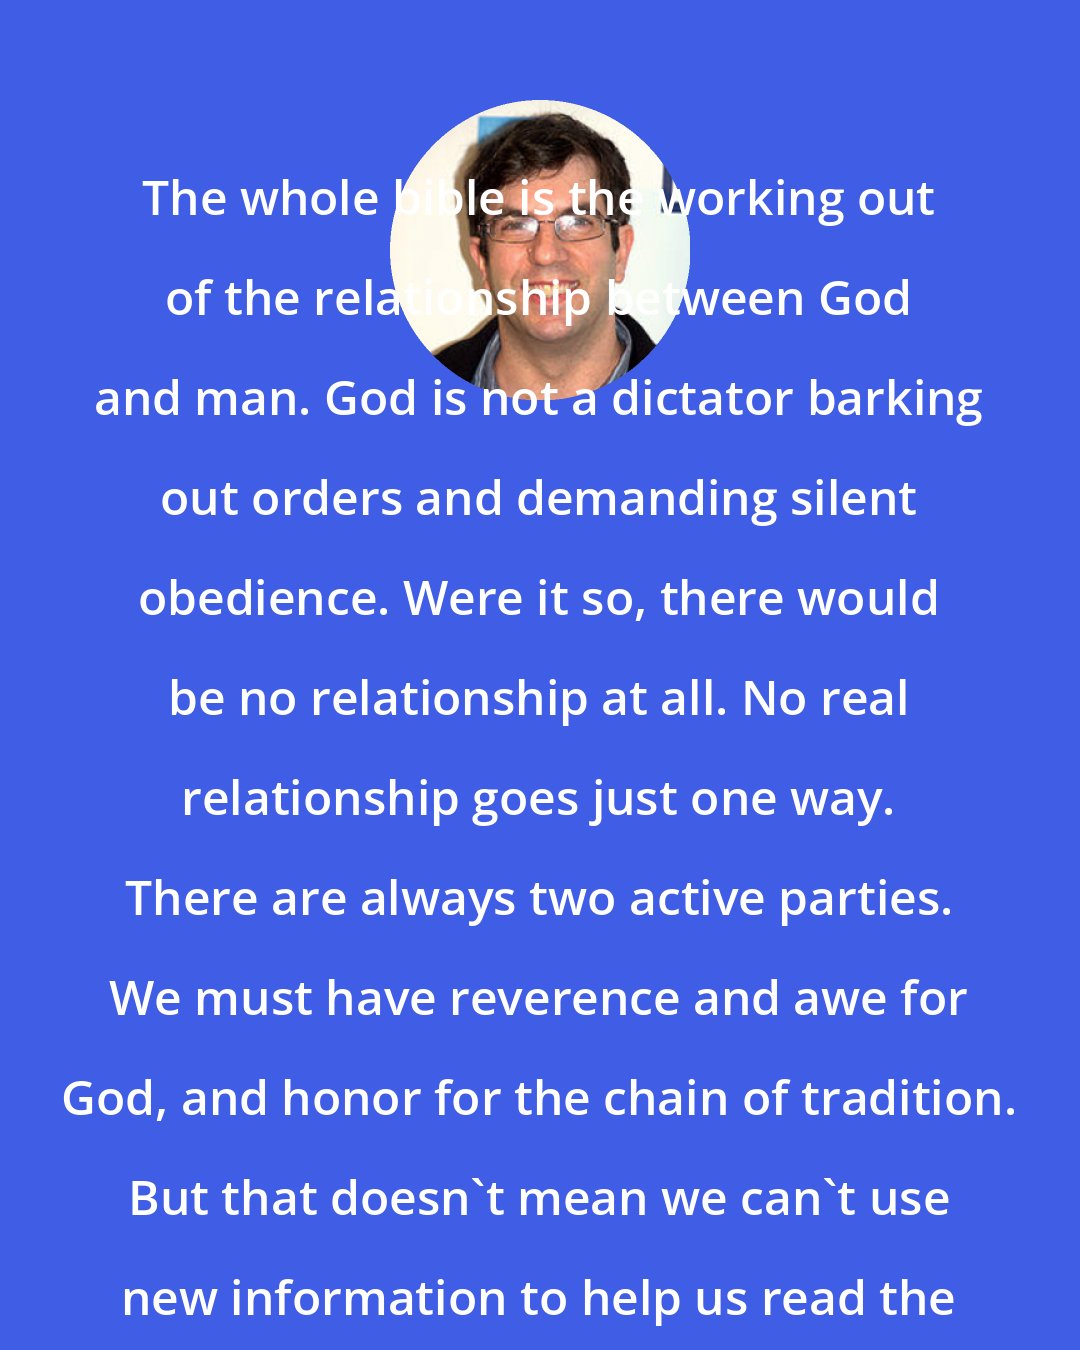 A. J. Jacobs: The whole bible is the working out of the relationship between God and man. God is not a dictator barking out orders and demanding silent obedience. Were it so, there would be no relationship at all. No real relationship goes just one way. There are always two active parties. We must have reverence and awe for God, and honor for the chain of tradition. But that doesn't mean we can't use new information to help us read the holy texts in new ways.